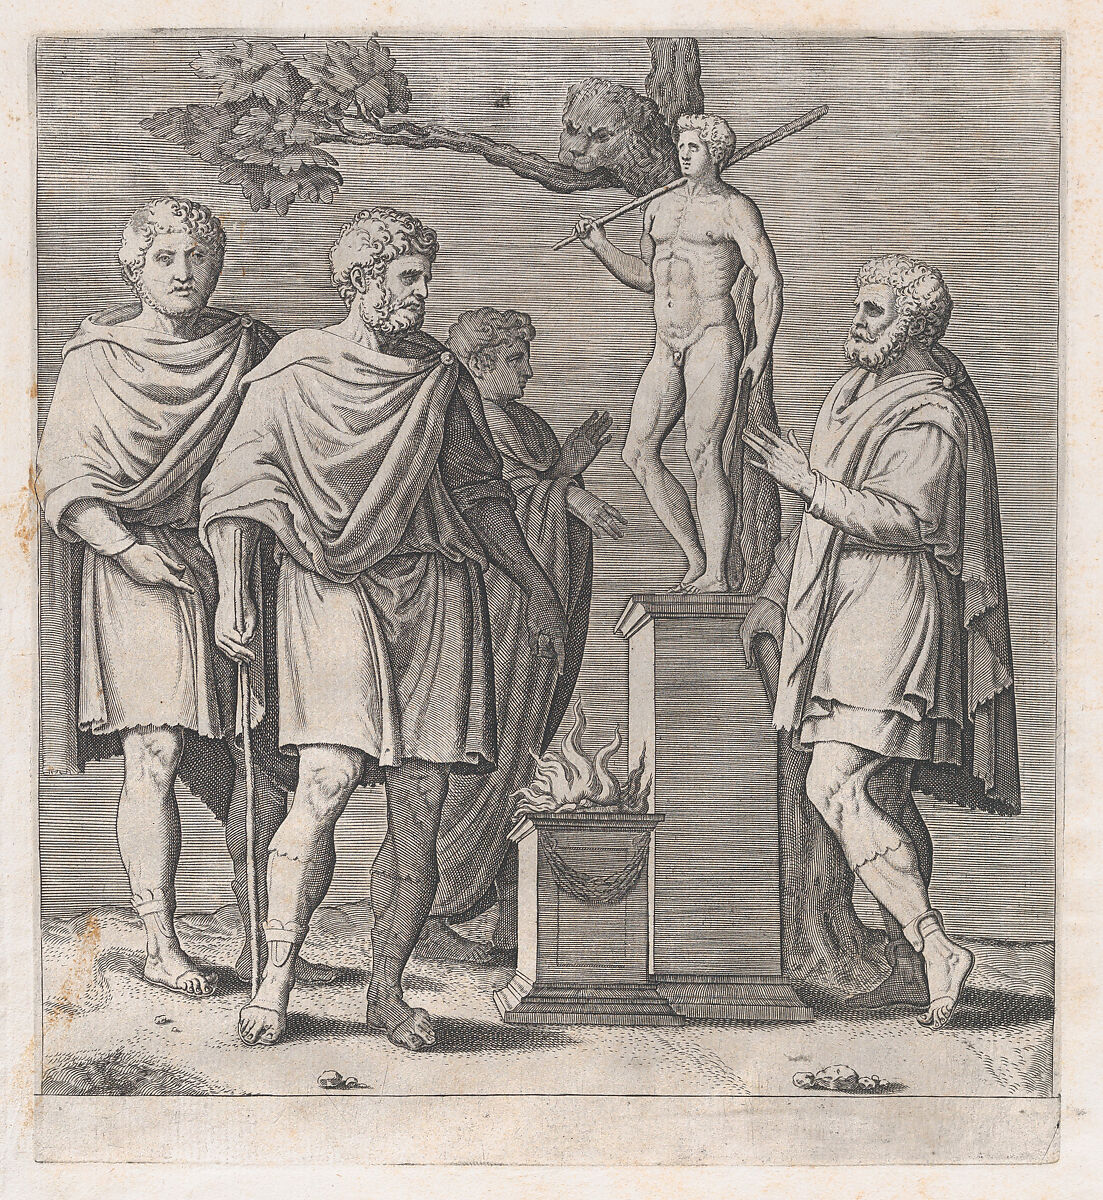 Sacrifice to Hercules, from "Speculum Romanae Magnificentiae", Anonymous, Etching 